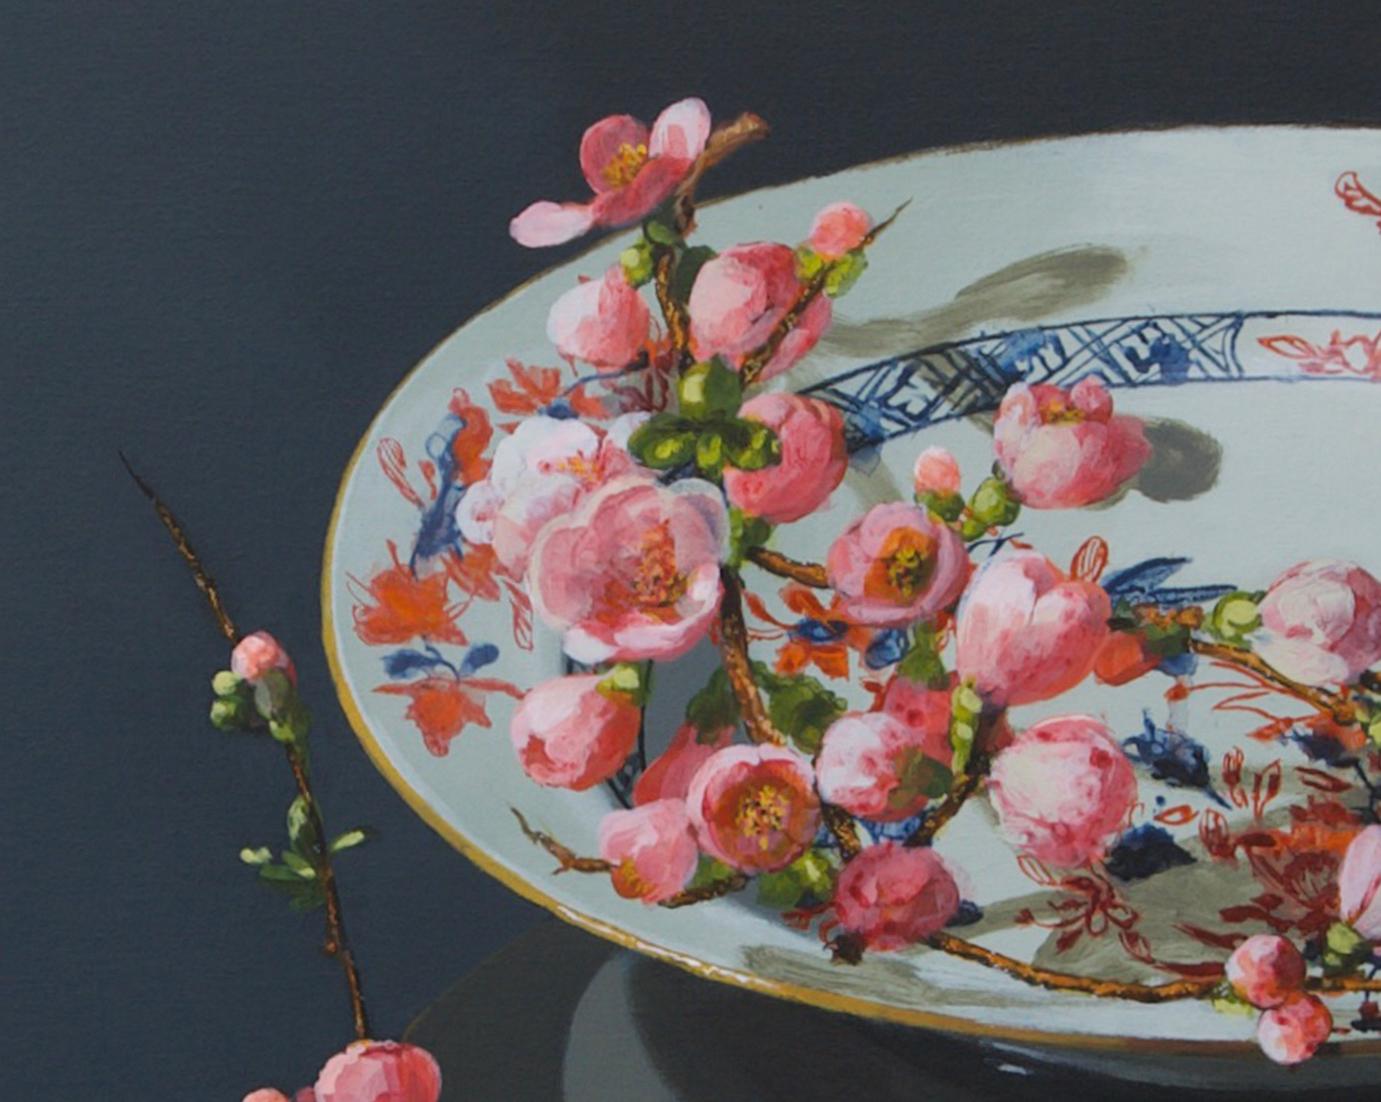 When you look at this painting ''Pink Blossom on Porcelain'' by Dutch artist Sasja Wagenaar (1959) from a distance you see a perfectly painted image, but up close a generous paint streak is visible. She has a unique way of applying shadow and light